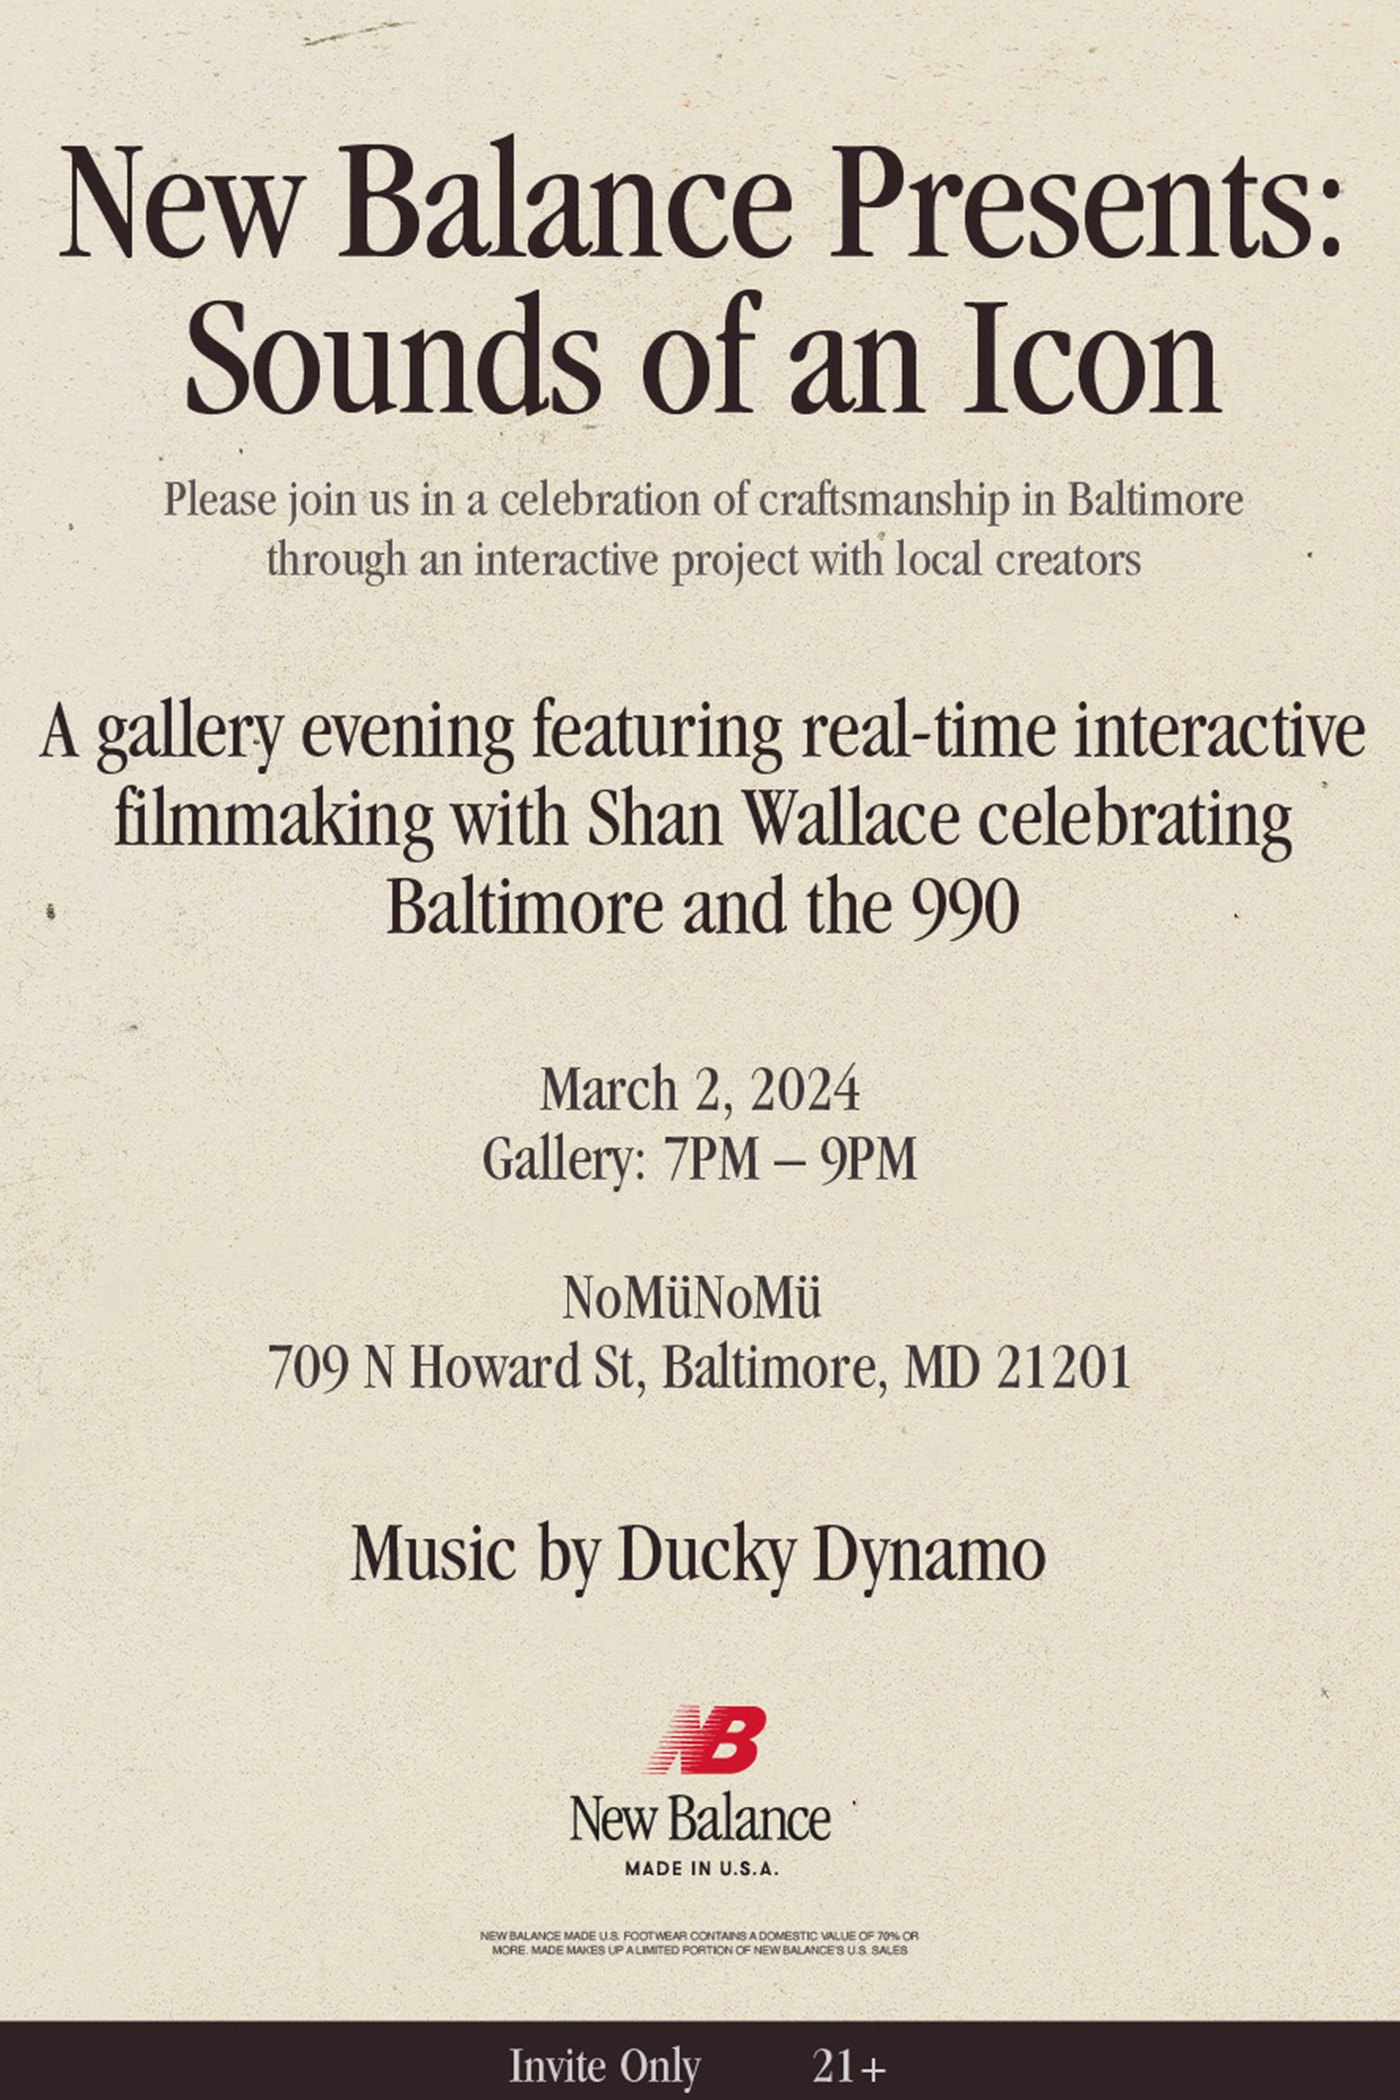 New Balance Sounds of an Icon Event in Baltimore Gallery and Workshop Experience